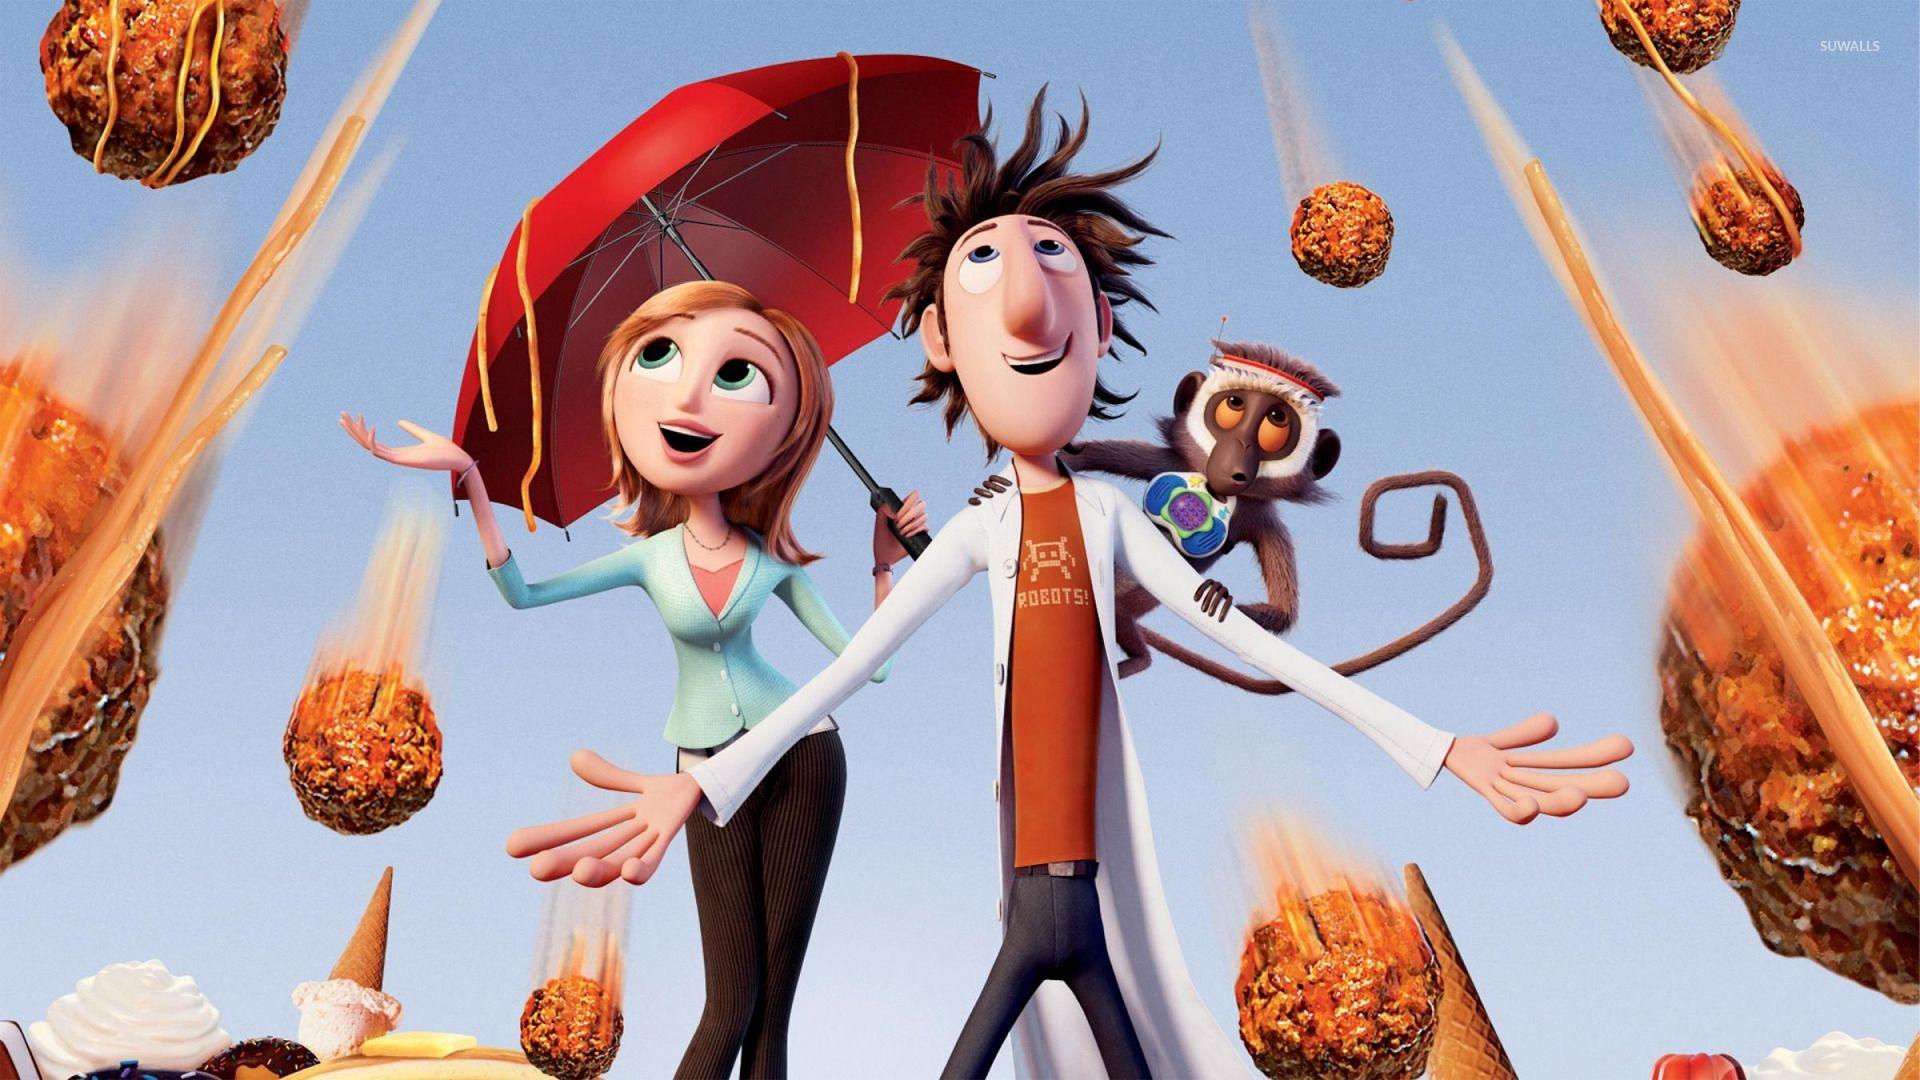 Cloudy with a Chance of Meatballs Wallpaper 9 X 1080